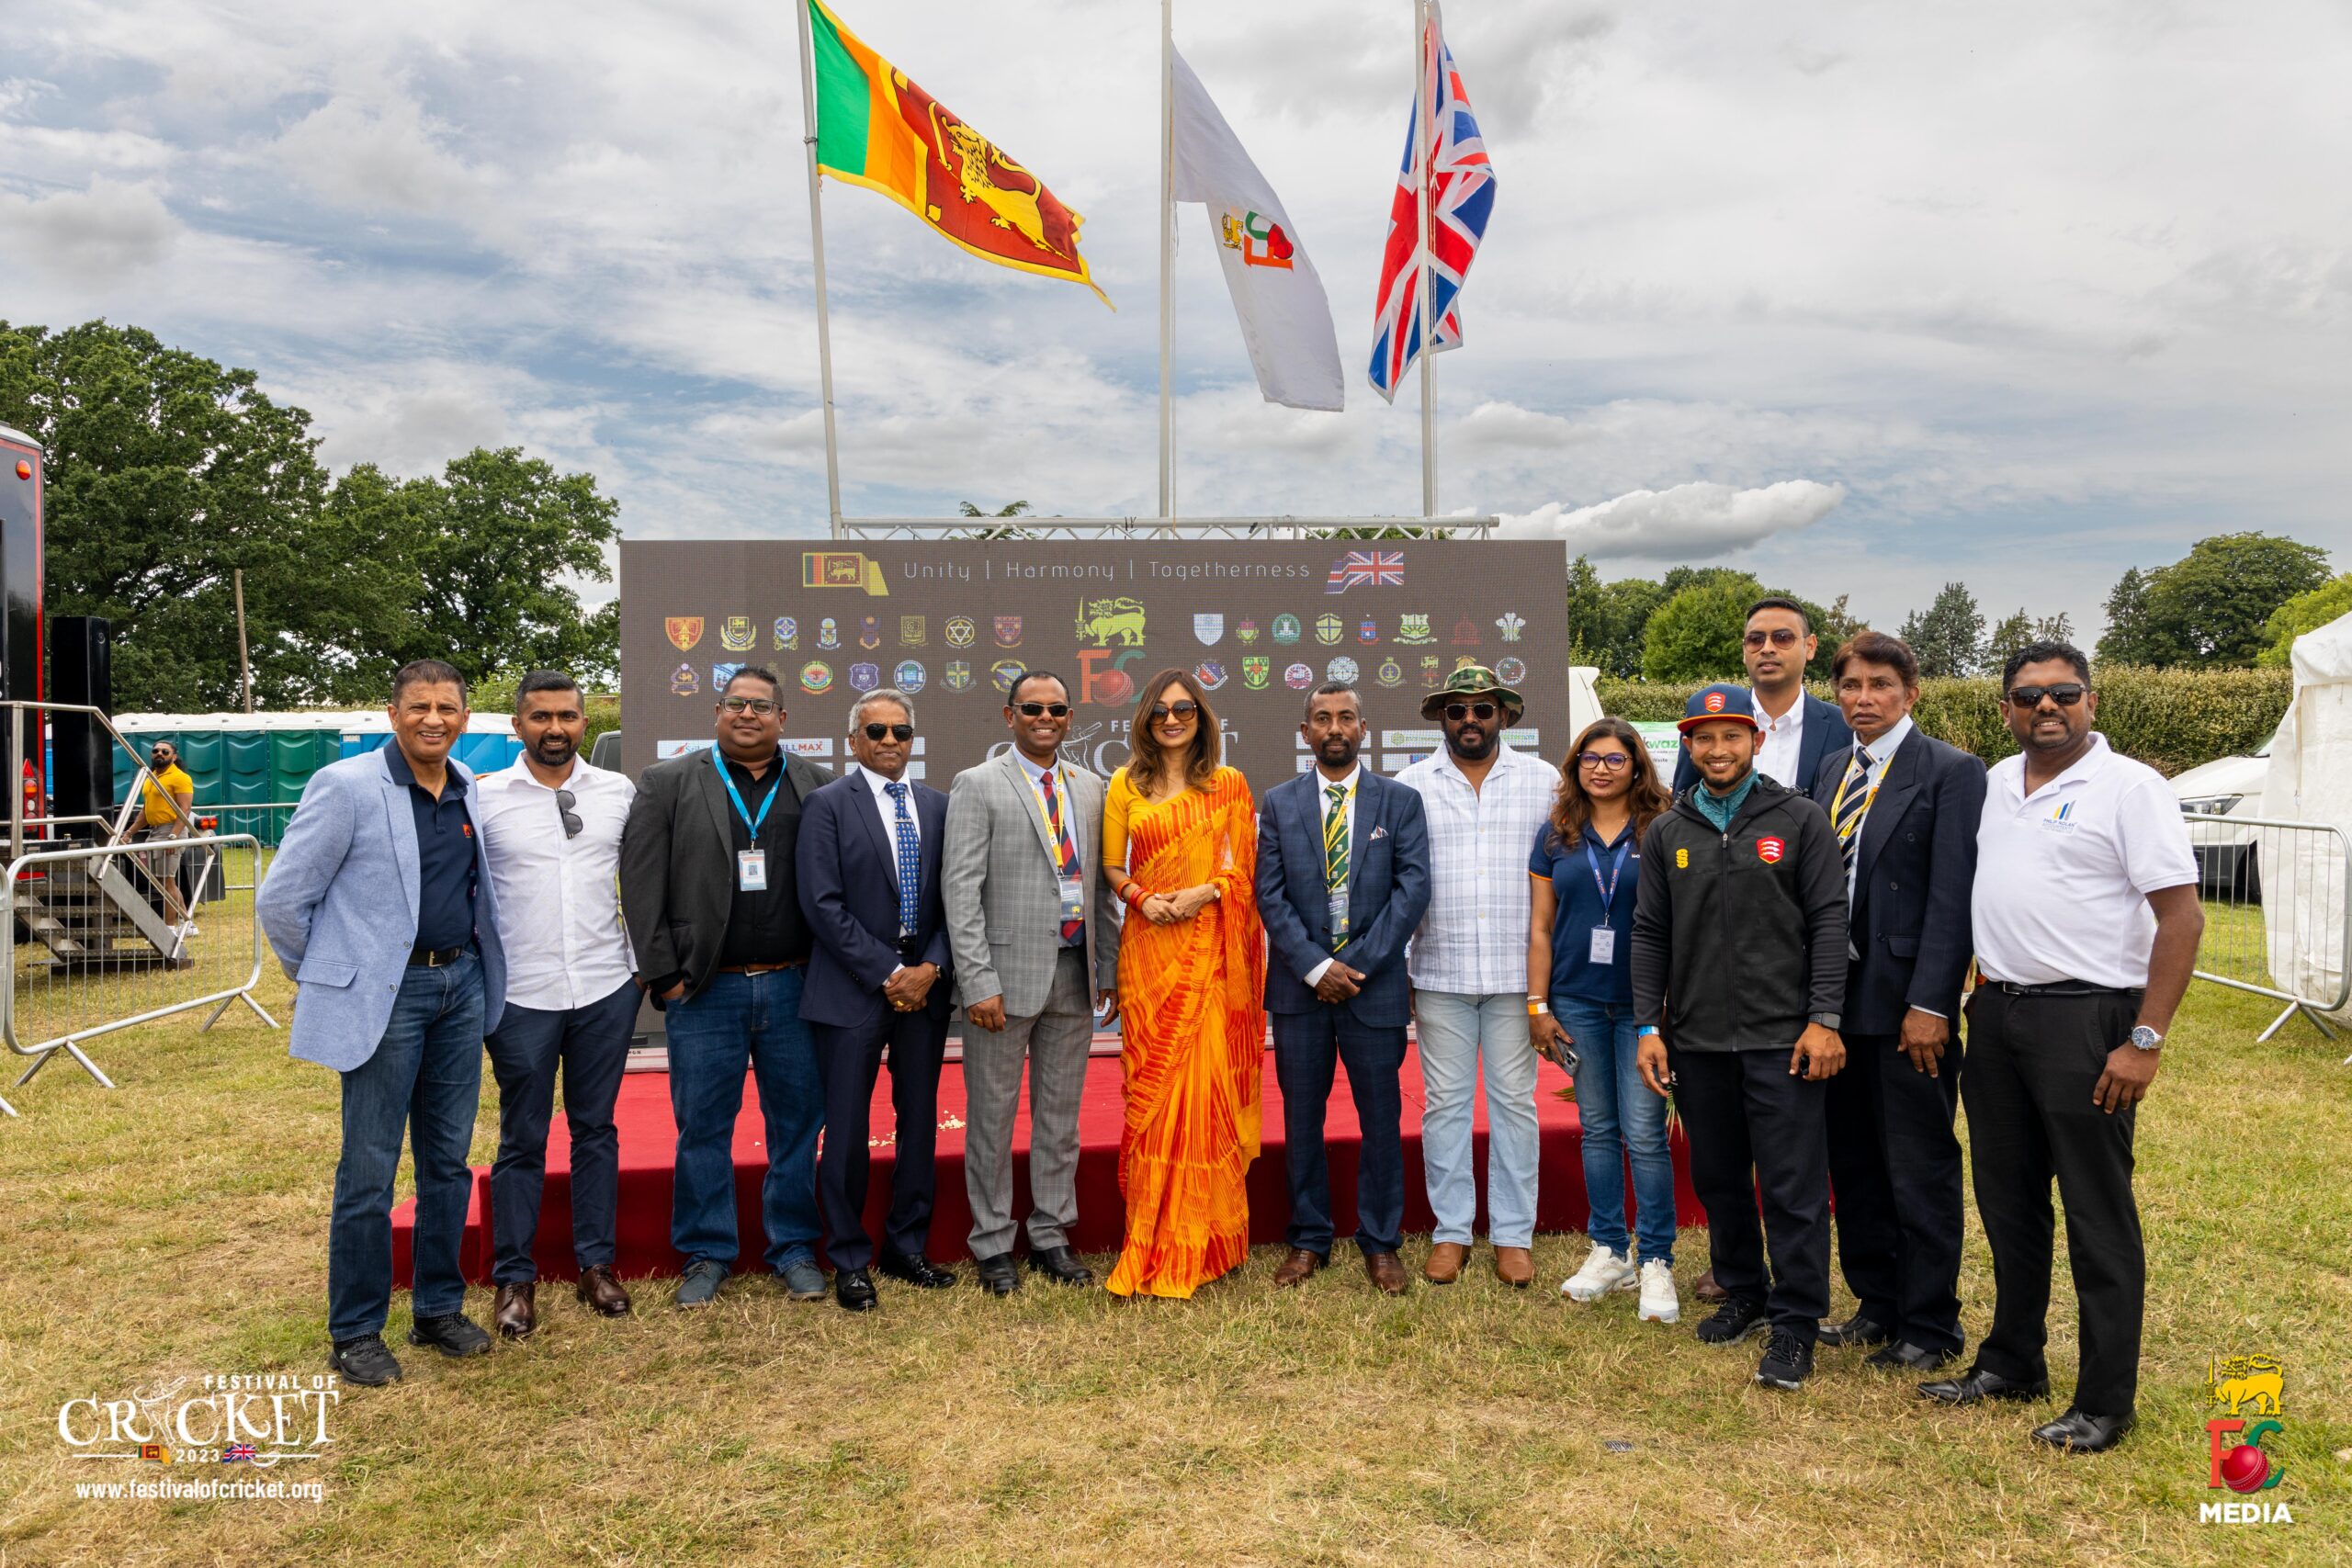 The Festival of Cricket 2023 successfully held under the patronage of the Sri Lankan High Commissioner in the United Kingdom